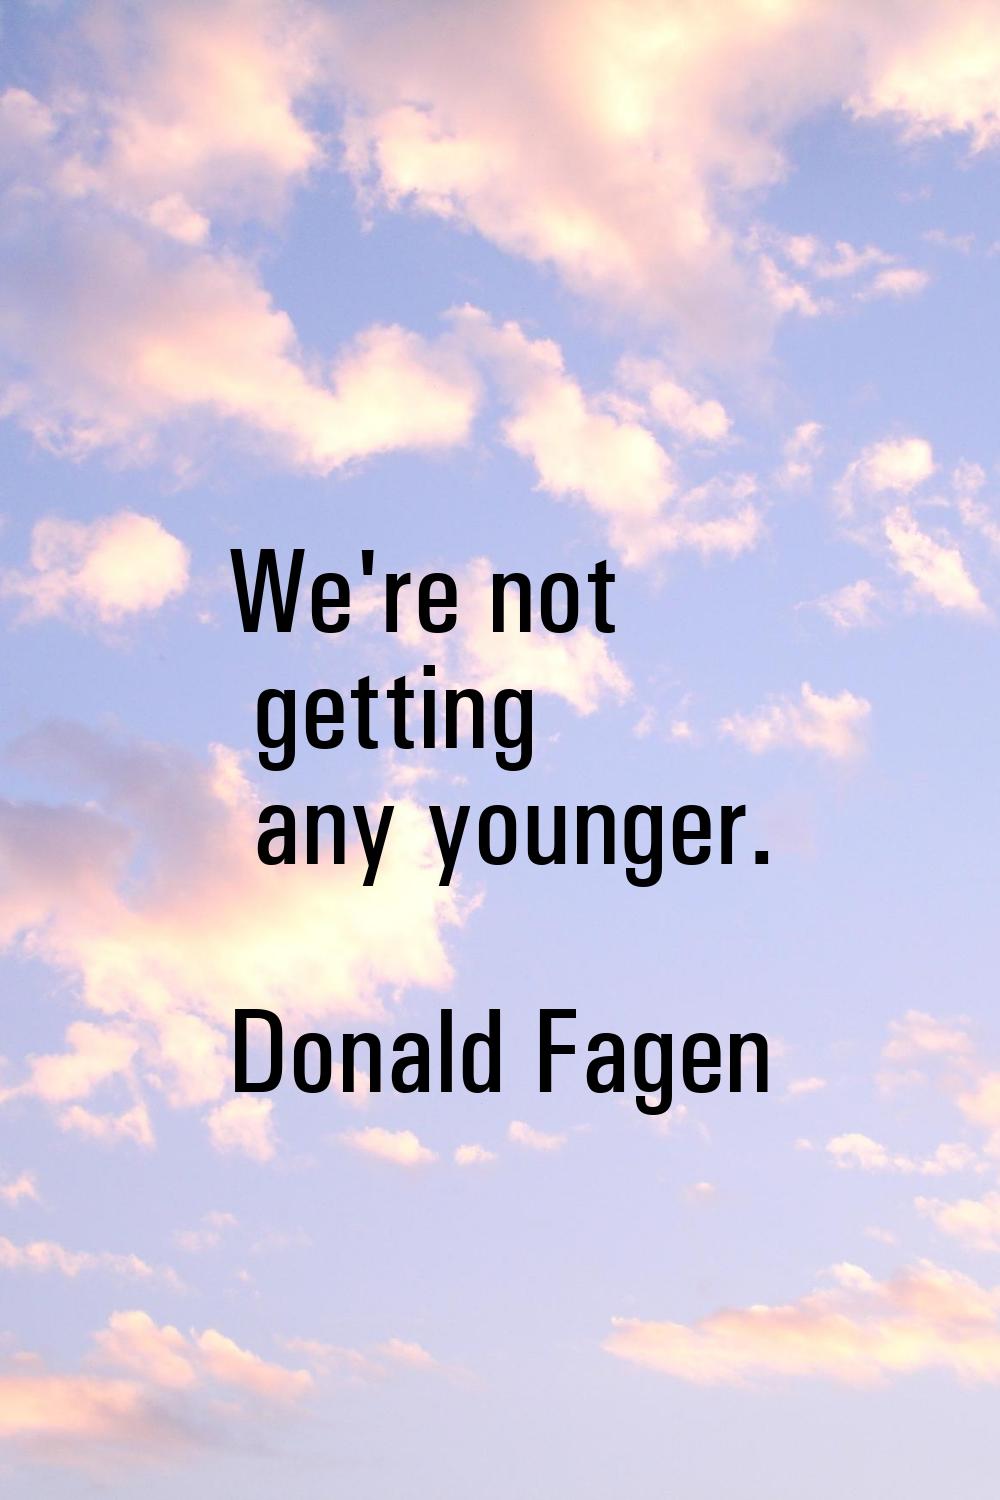 We're not getting any younger.